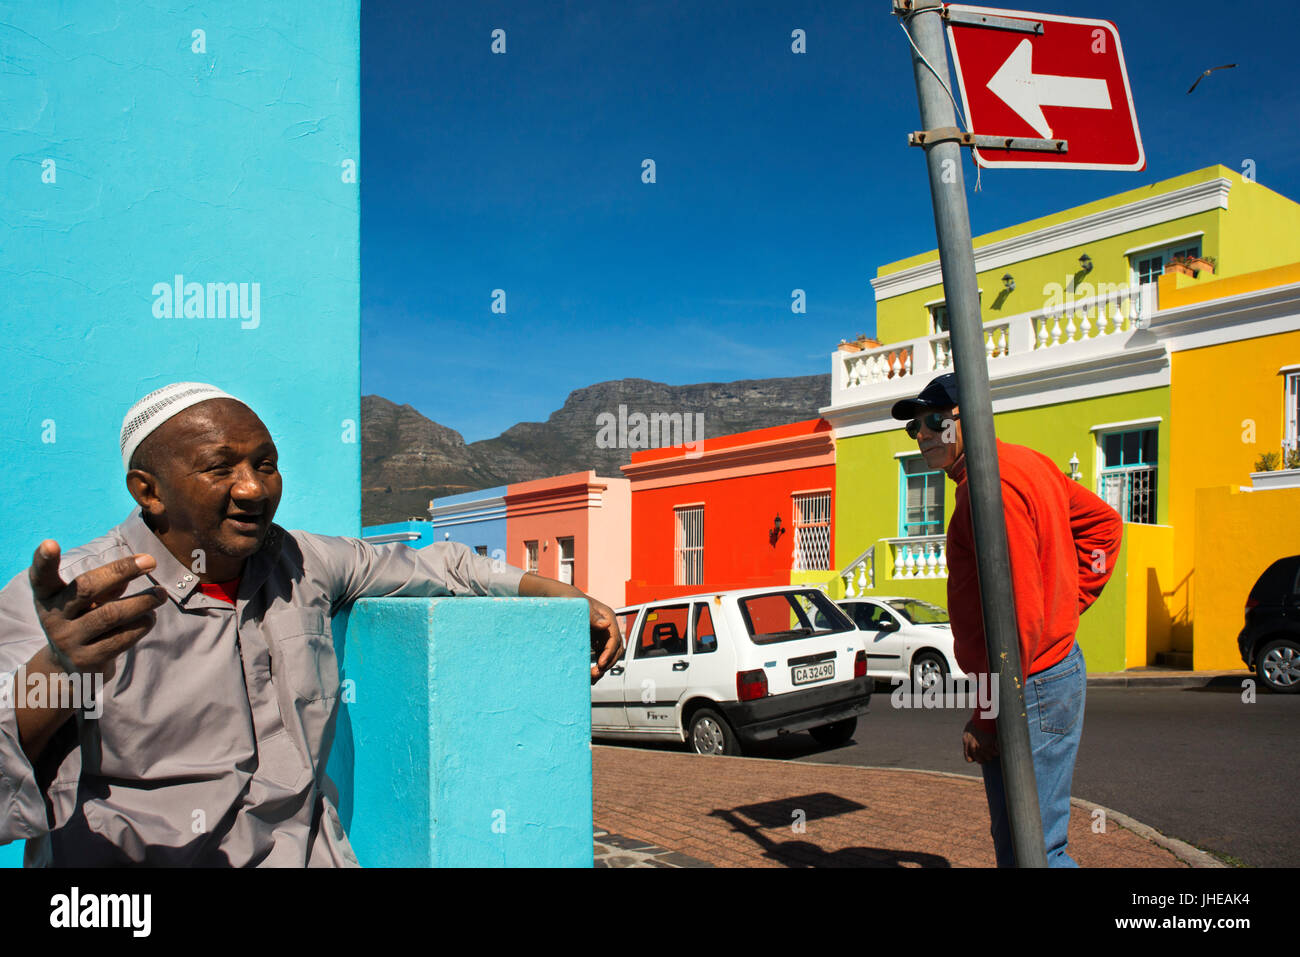 Colourful buildings houses in Bo-Kaap, Malay Quarter, Cape Town, Western Cape, South Africa Stock Photo